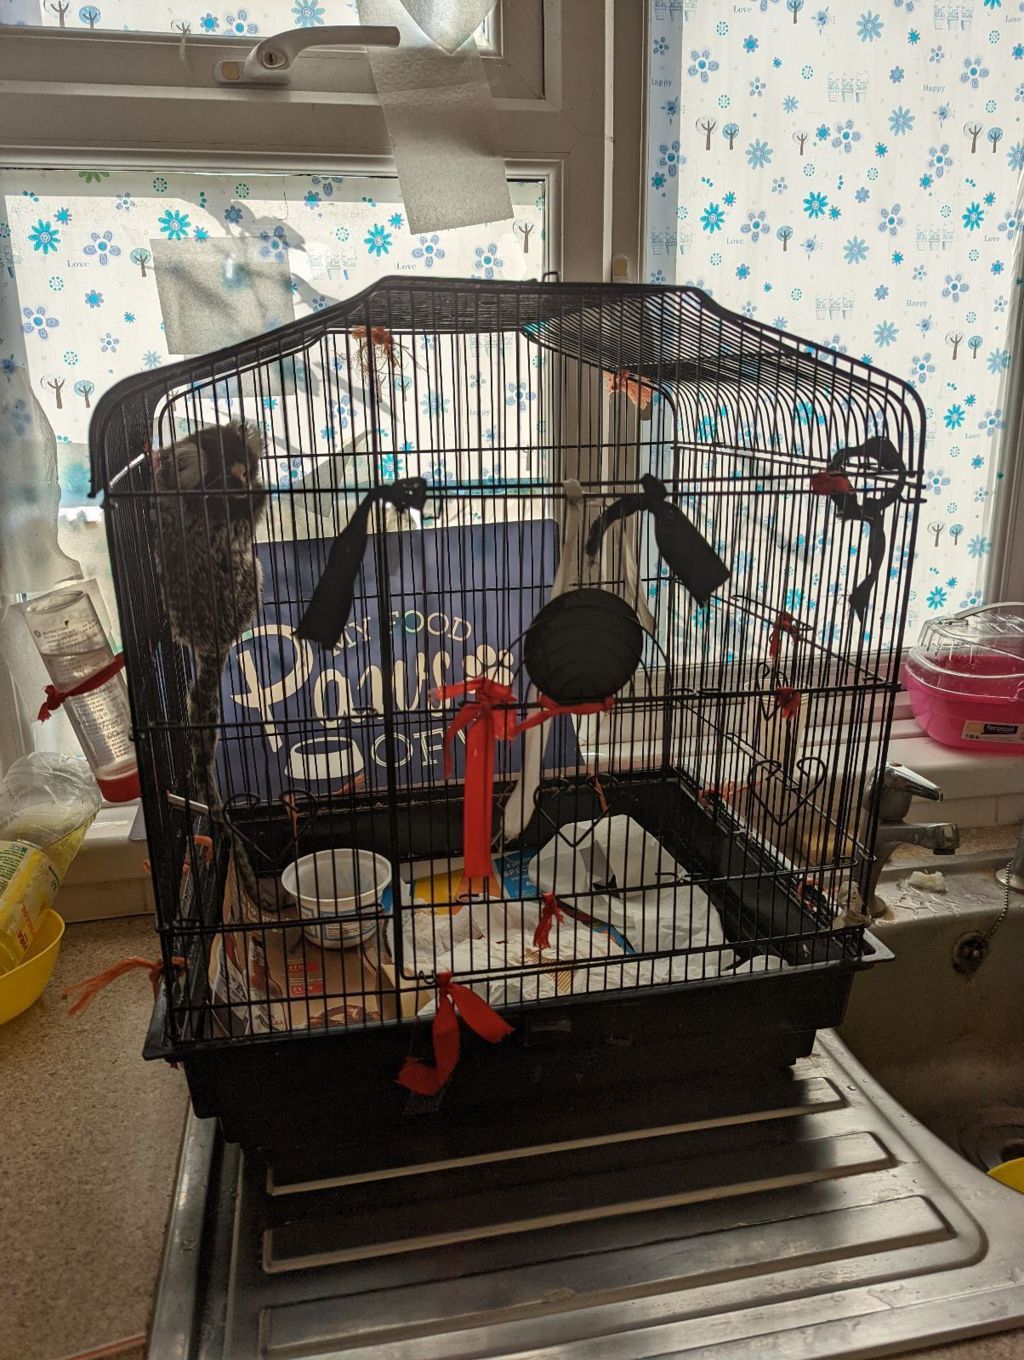 A monkey in a small cage